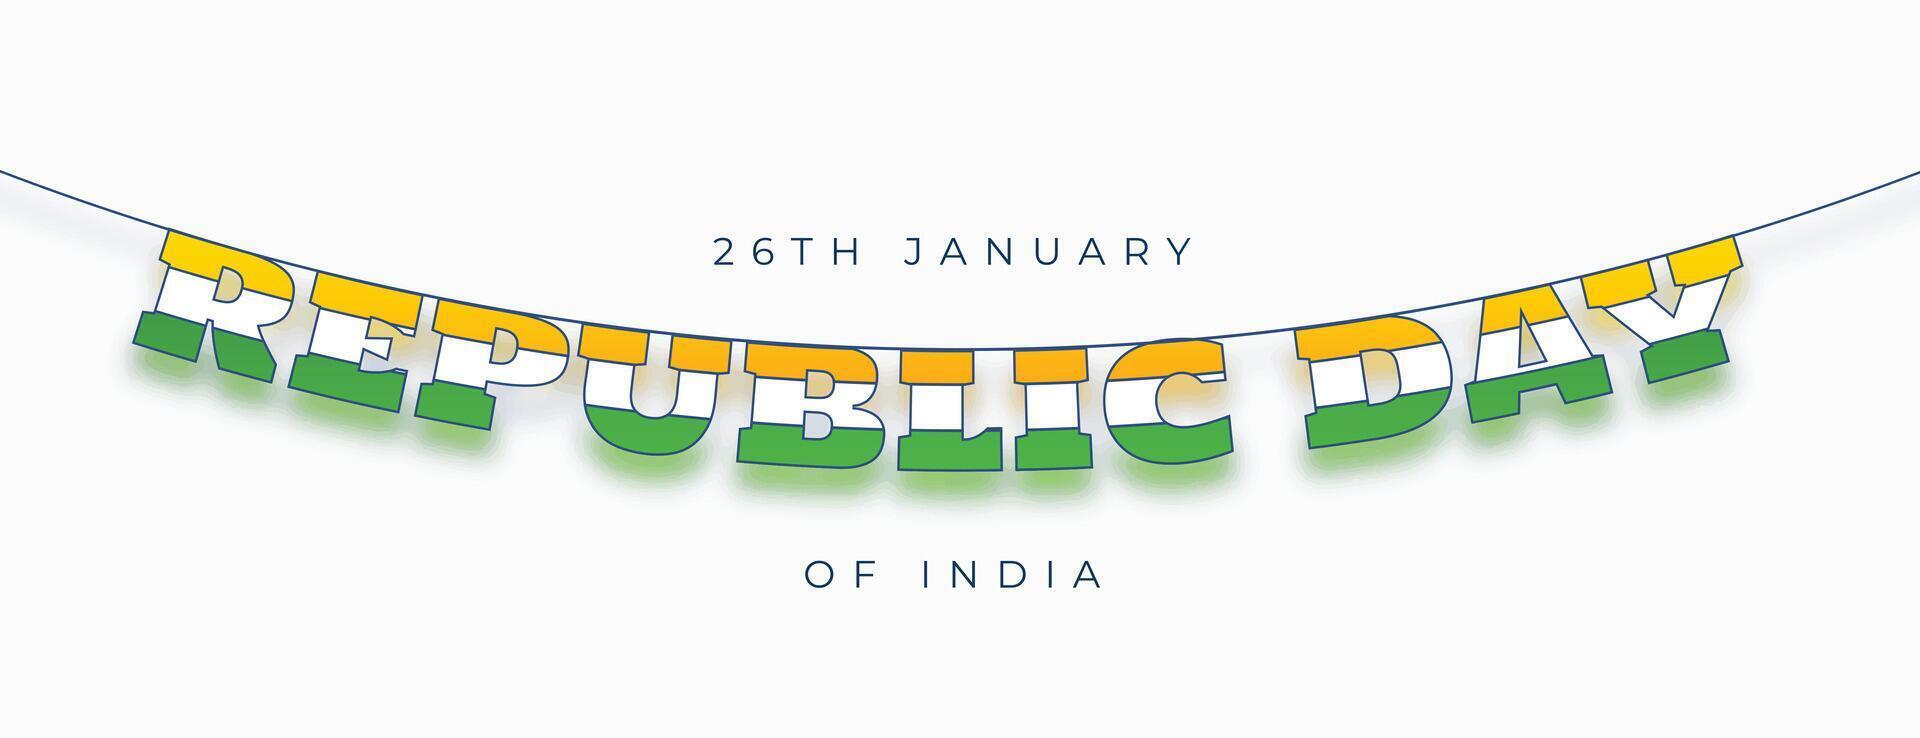 happy indian republic day celebration banner in garland style vector